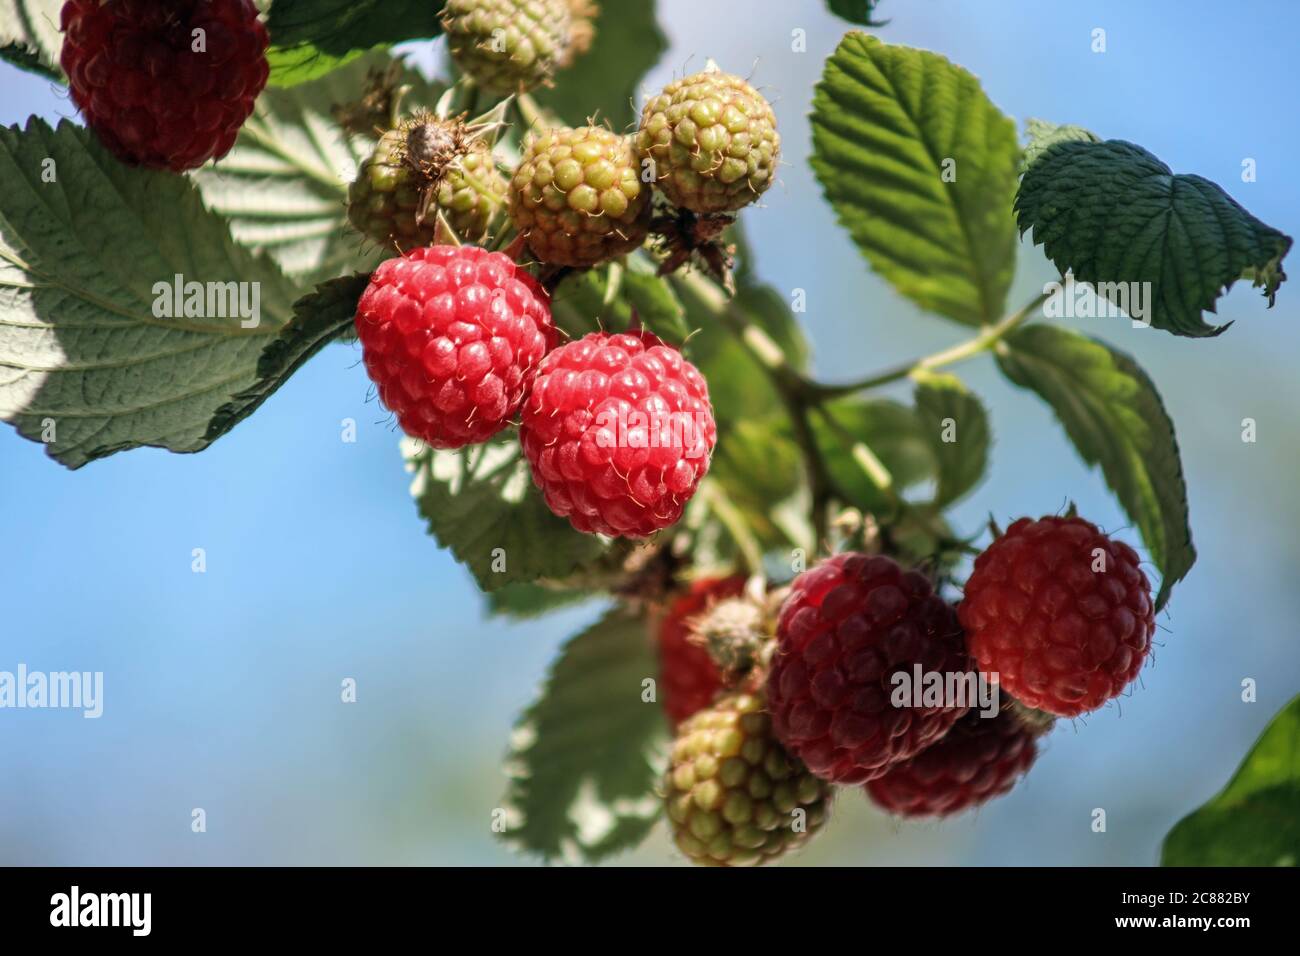 Raspberries coming into season, some ripe others still green Stock Photo